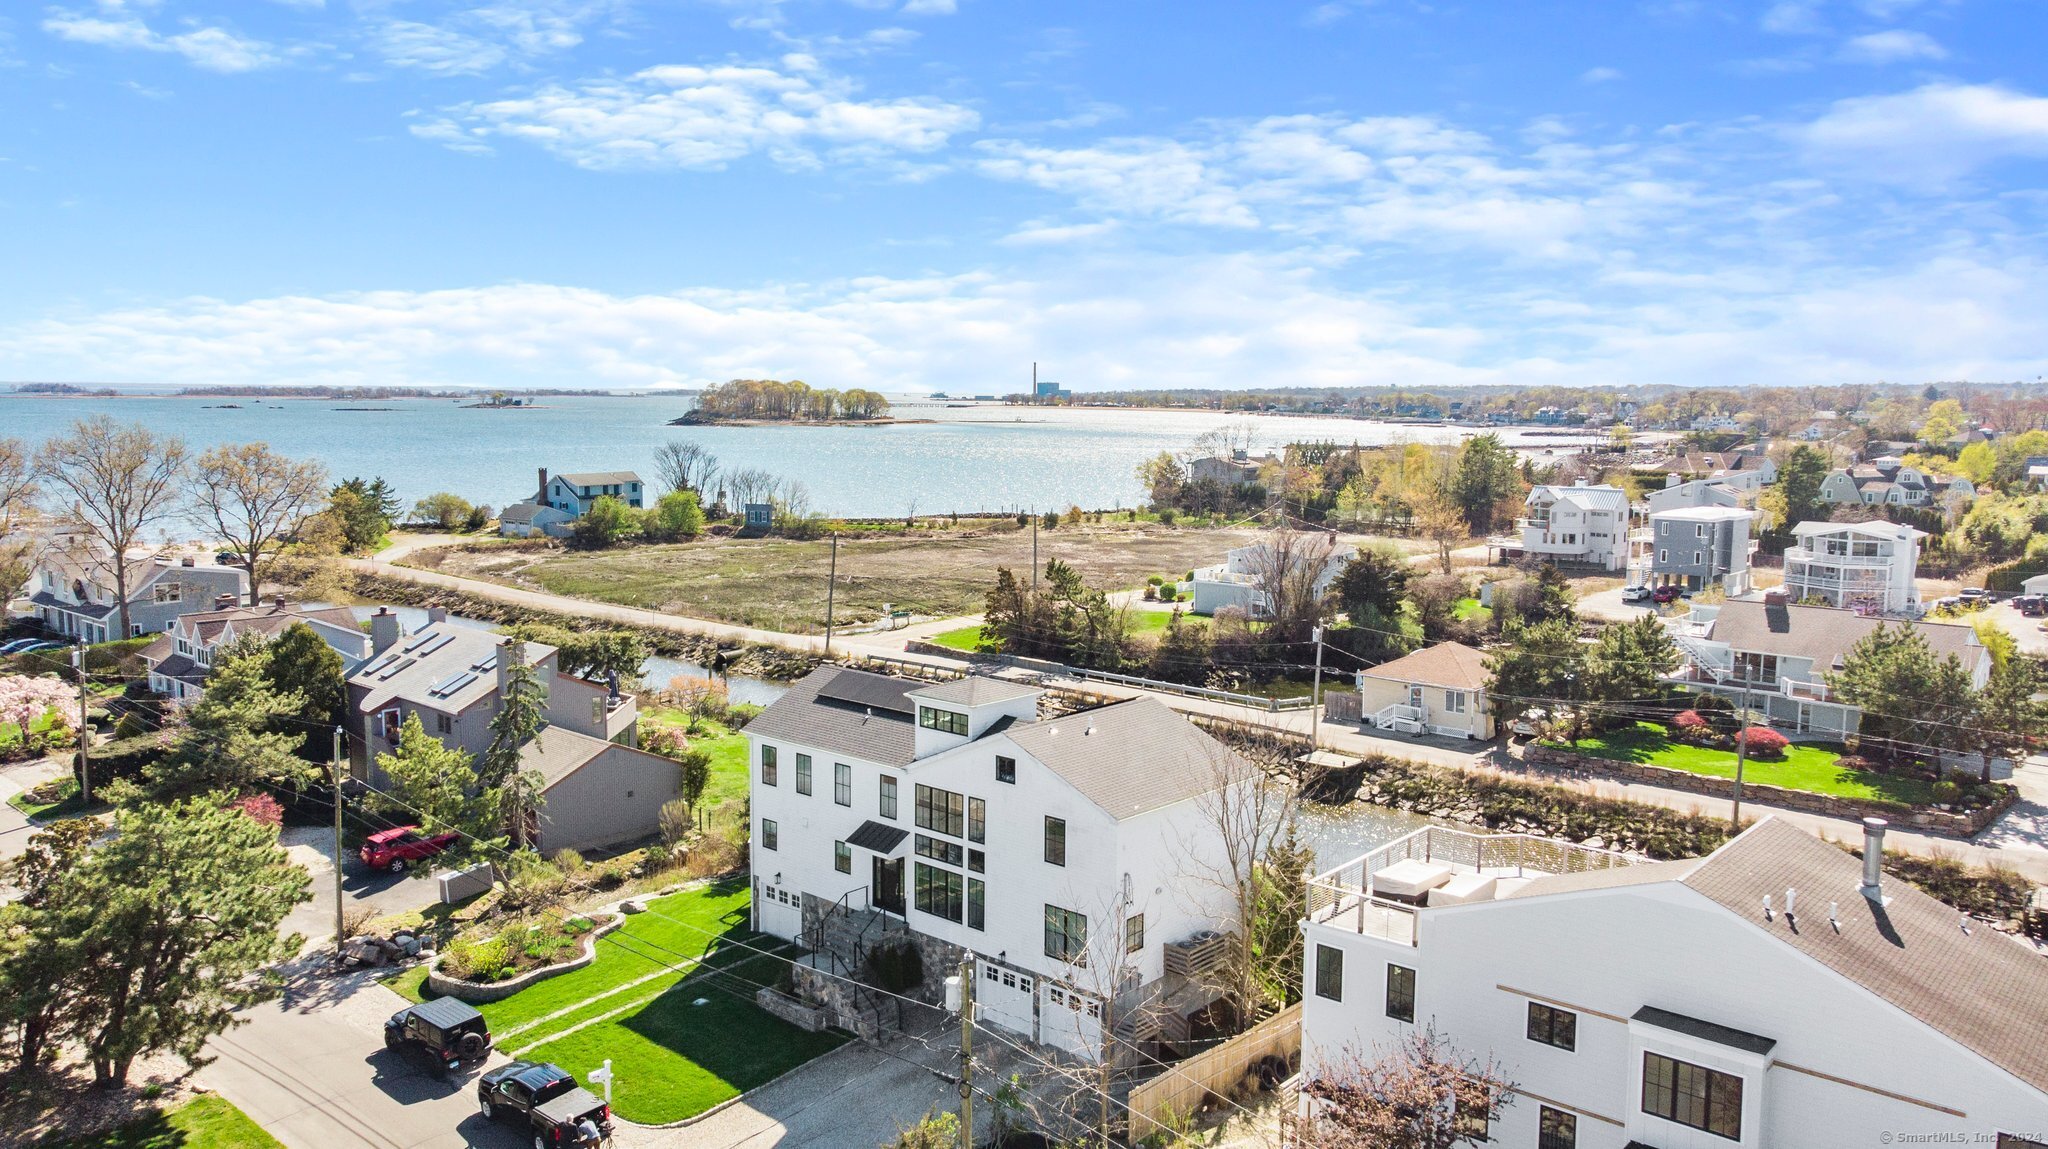 PREPARE TO BE WOWED by the "to-die-for" water views throughout this modern & elegant 4 bdrm, 3.5 bath home. This stunning residence designed and built by the current residents in 2018, spans 3,271 sq ft and is situated on a generous 9,583 square foot lot. Upon entering, you are greeted by an abundance of natural light that enhances the sleek & sophisticated interior. Wonderful flow w/open floor plan connecting living, dining, & kitchen areas, creating an ideal space for entertaining and everyday living. Double sliding glass doors open completely to seamlessly blend indoor & outdoor living. The gourmet kitchen features top-of-the-line appliances, custom cabinetry, & large center island, perfect for culinary enthusiasts. The primary bedroom suite is a tranquil retreat, boasting ample space, a luxurious en-suite bathroom w/radiant heated floors, walk-in closets and a deck to take in the exquisite sunrises & sunsets. A Jr bedroom suite plus 2 additional bdrms offer flexibility for family & guests.The home also provides an office, gym, boat dock, solar panels & full house generator, outdoor shower & even a Kegerator. The well-appointed bathrooms are designed w/modern fixtures and finishes, providing a spa-like experience. Step outside to the private outdoor oasis, complete with spacious rooftop terrace, patio, decks, lush landscaping, & plenty of space for al fresco dining & relaxation. Enjoy a Saugatuck Island lifestyle where you'll feel like you're on a full-time Staycation!!